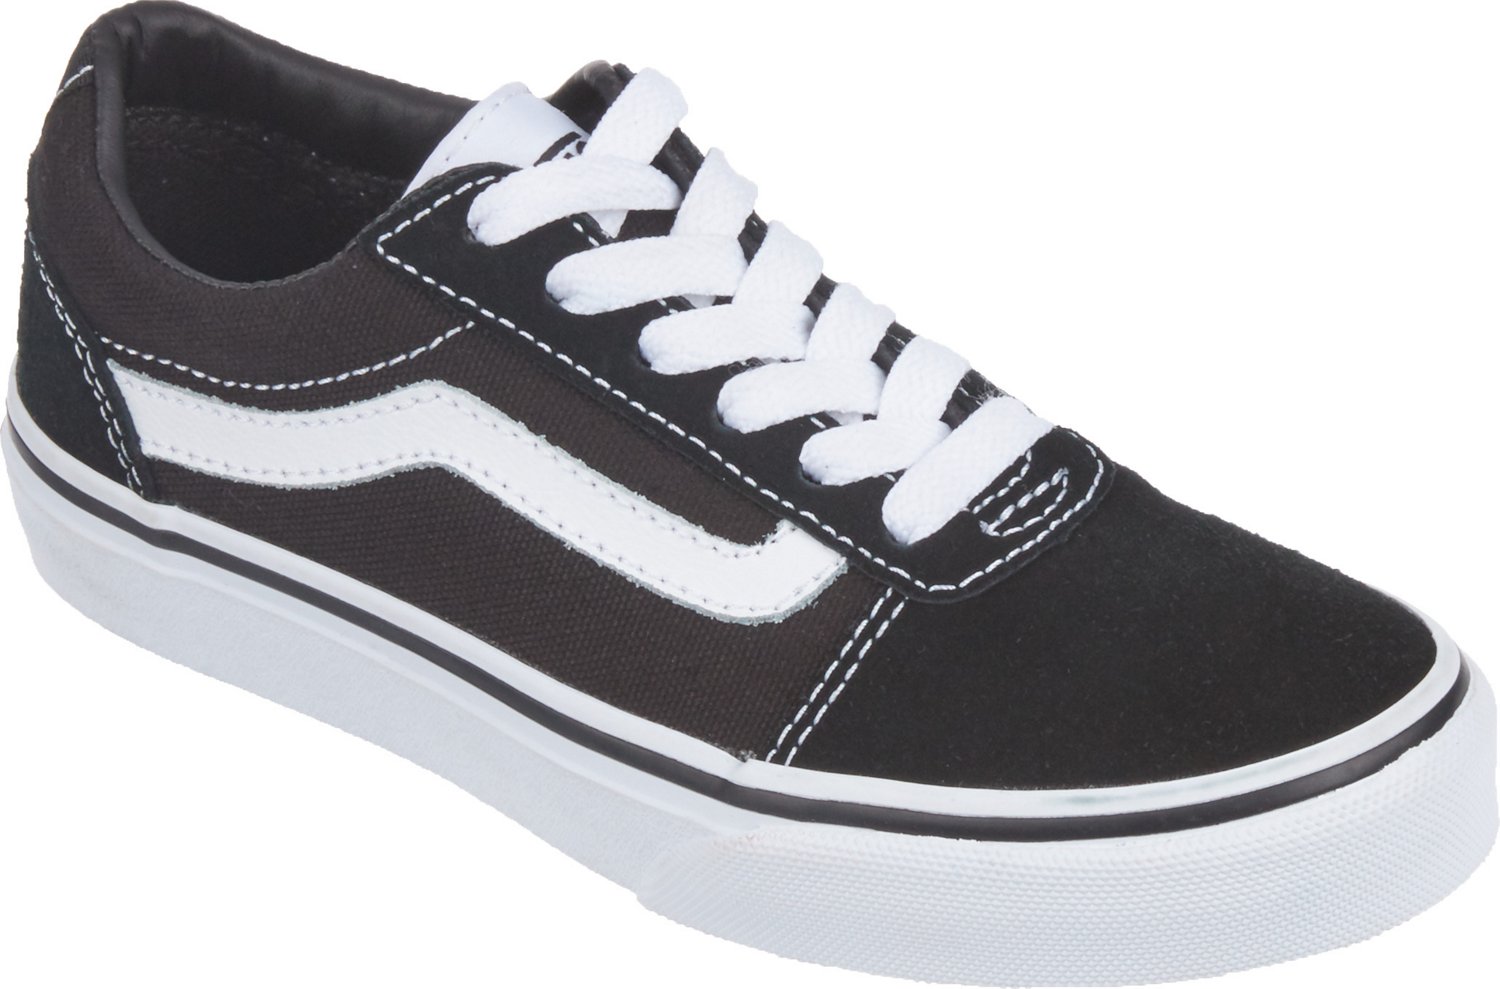 academy sports vans shoes